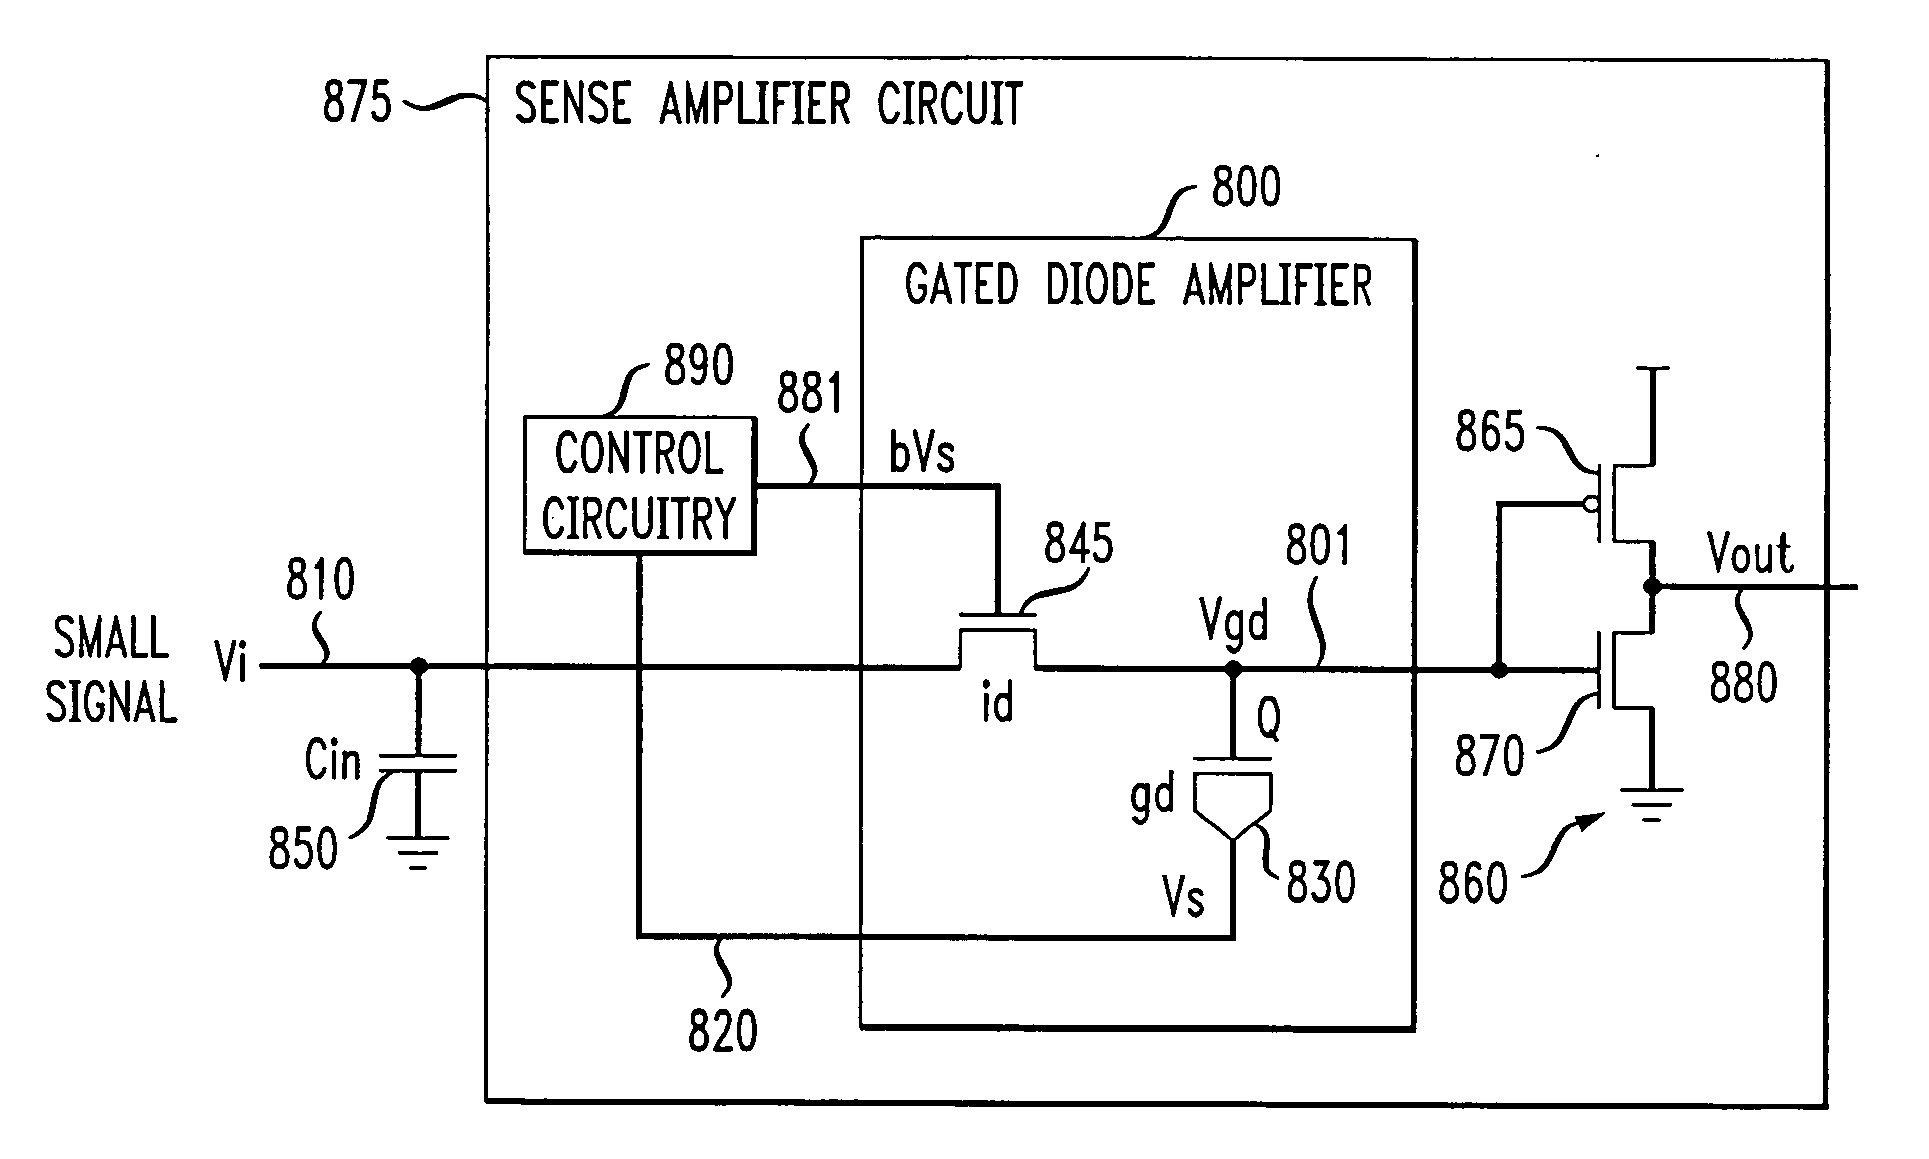 Sense amplifier circuits and high speed latch circuits using gated diodes